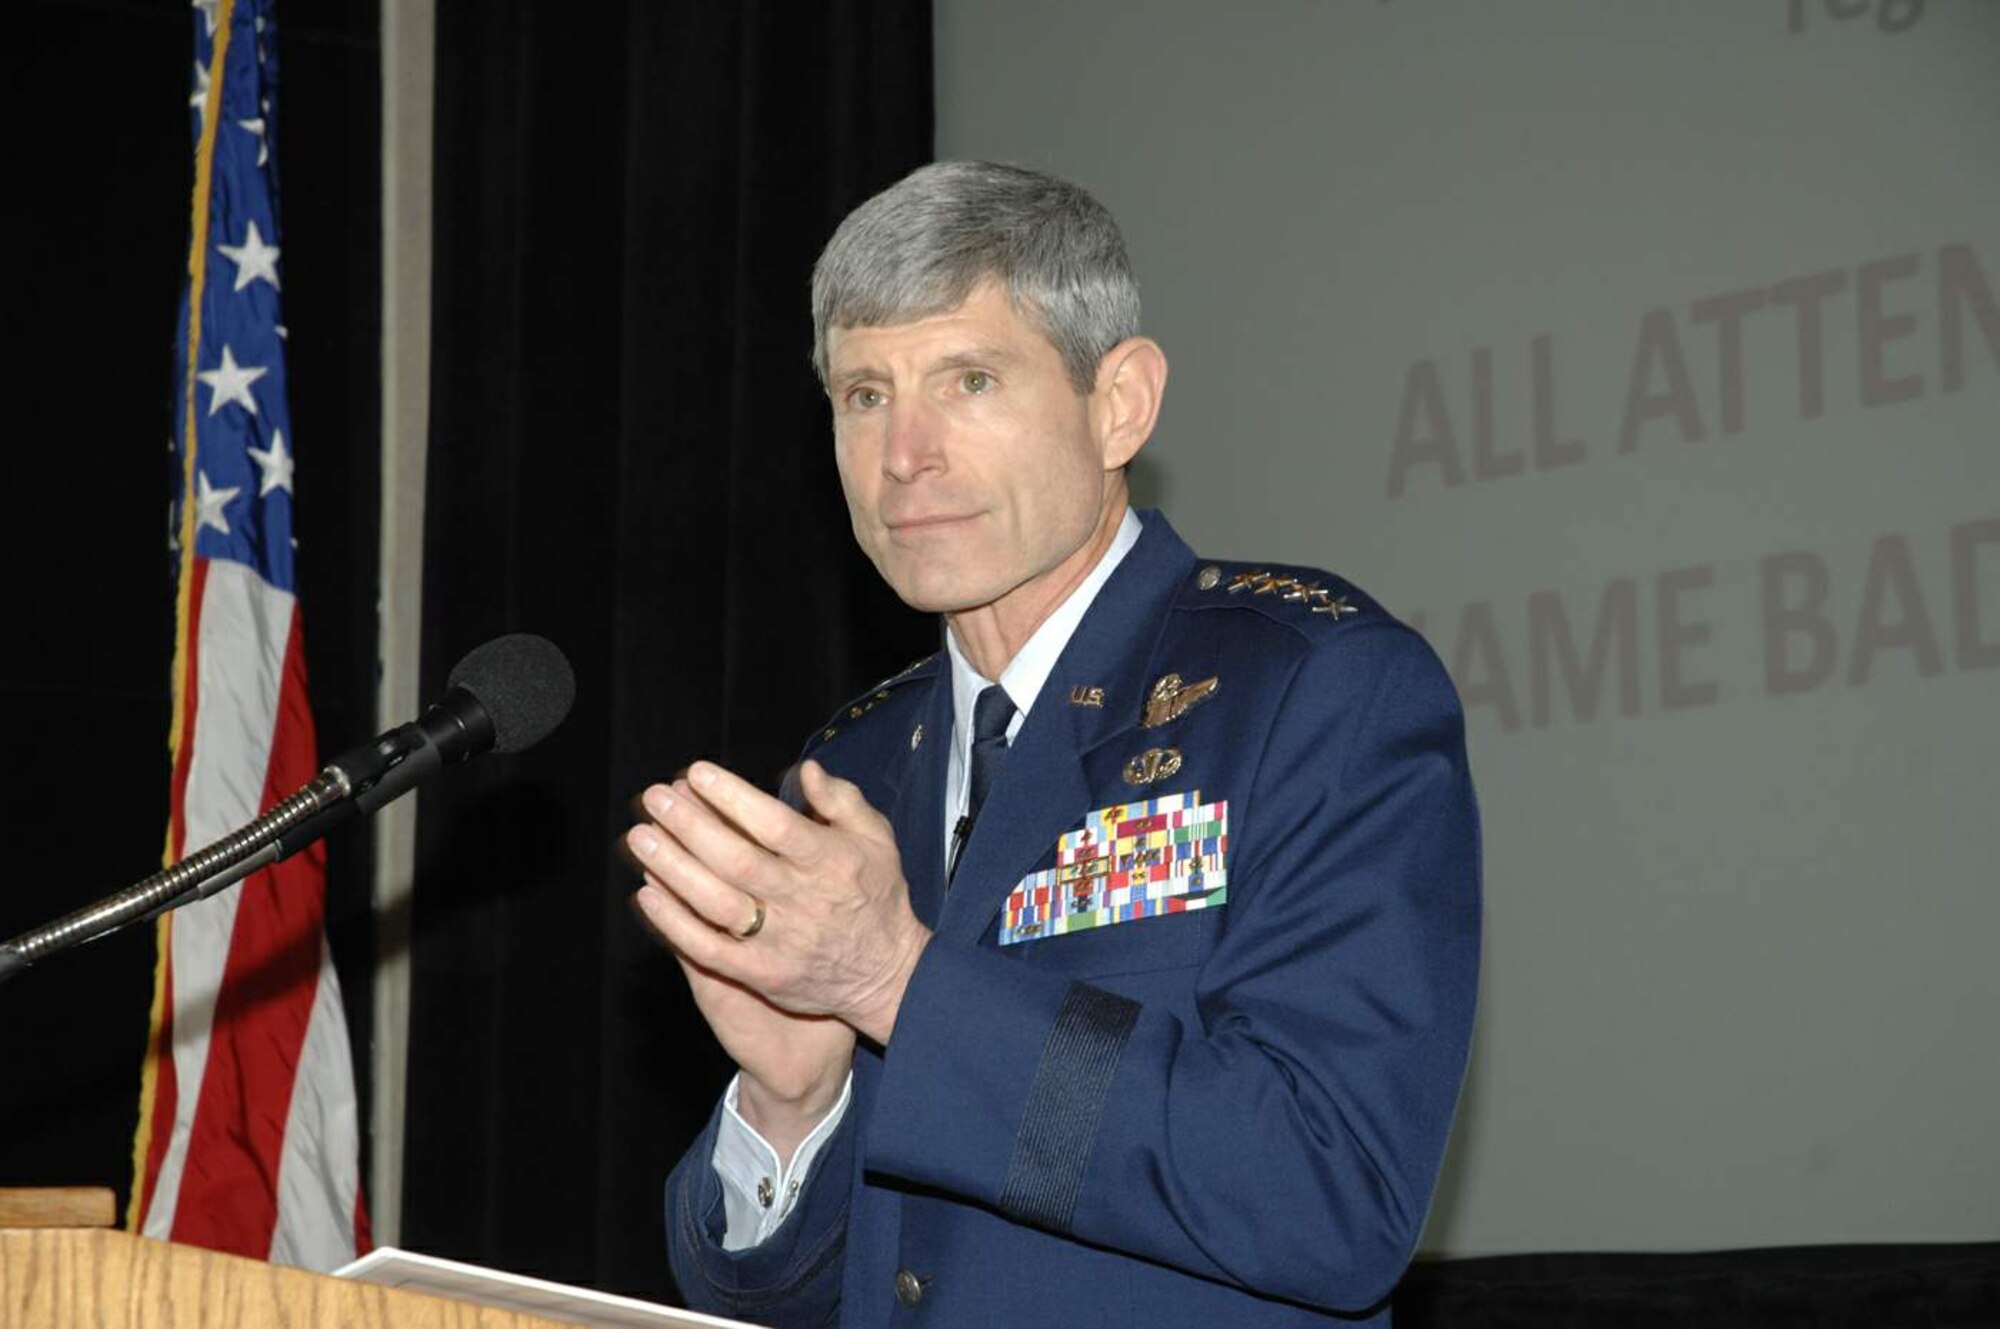 Gen. Norton Schwartz, Air Force chief of staff, speaks to an assembly of some 700 Air Force acquisition professionals and defense industry partners April 21 during DOD Acquisition Insight Days at Sinclair Community College in Dayton, Ohio. The event, organized by officials at Defense Acquisition University - Midwest Region, provided senior leader perspectives, workshops and training focused on delivering war-winning capabilities for joint warfighters.  (U.S. Air Force photo/Al Bright)